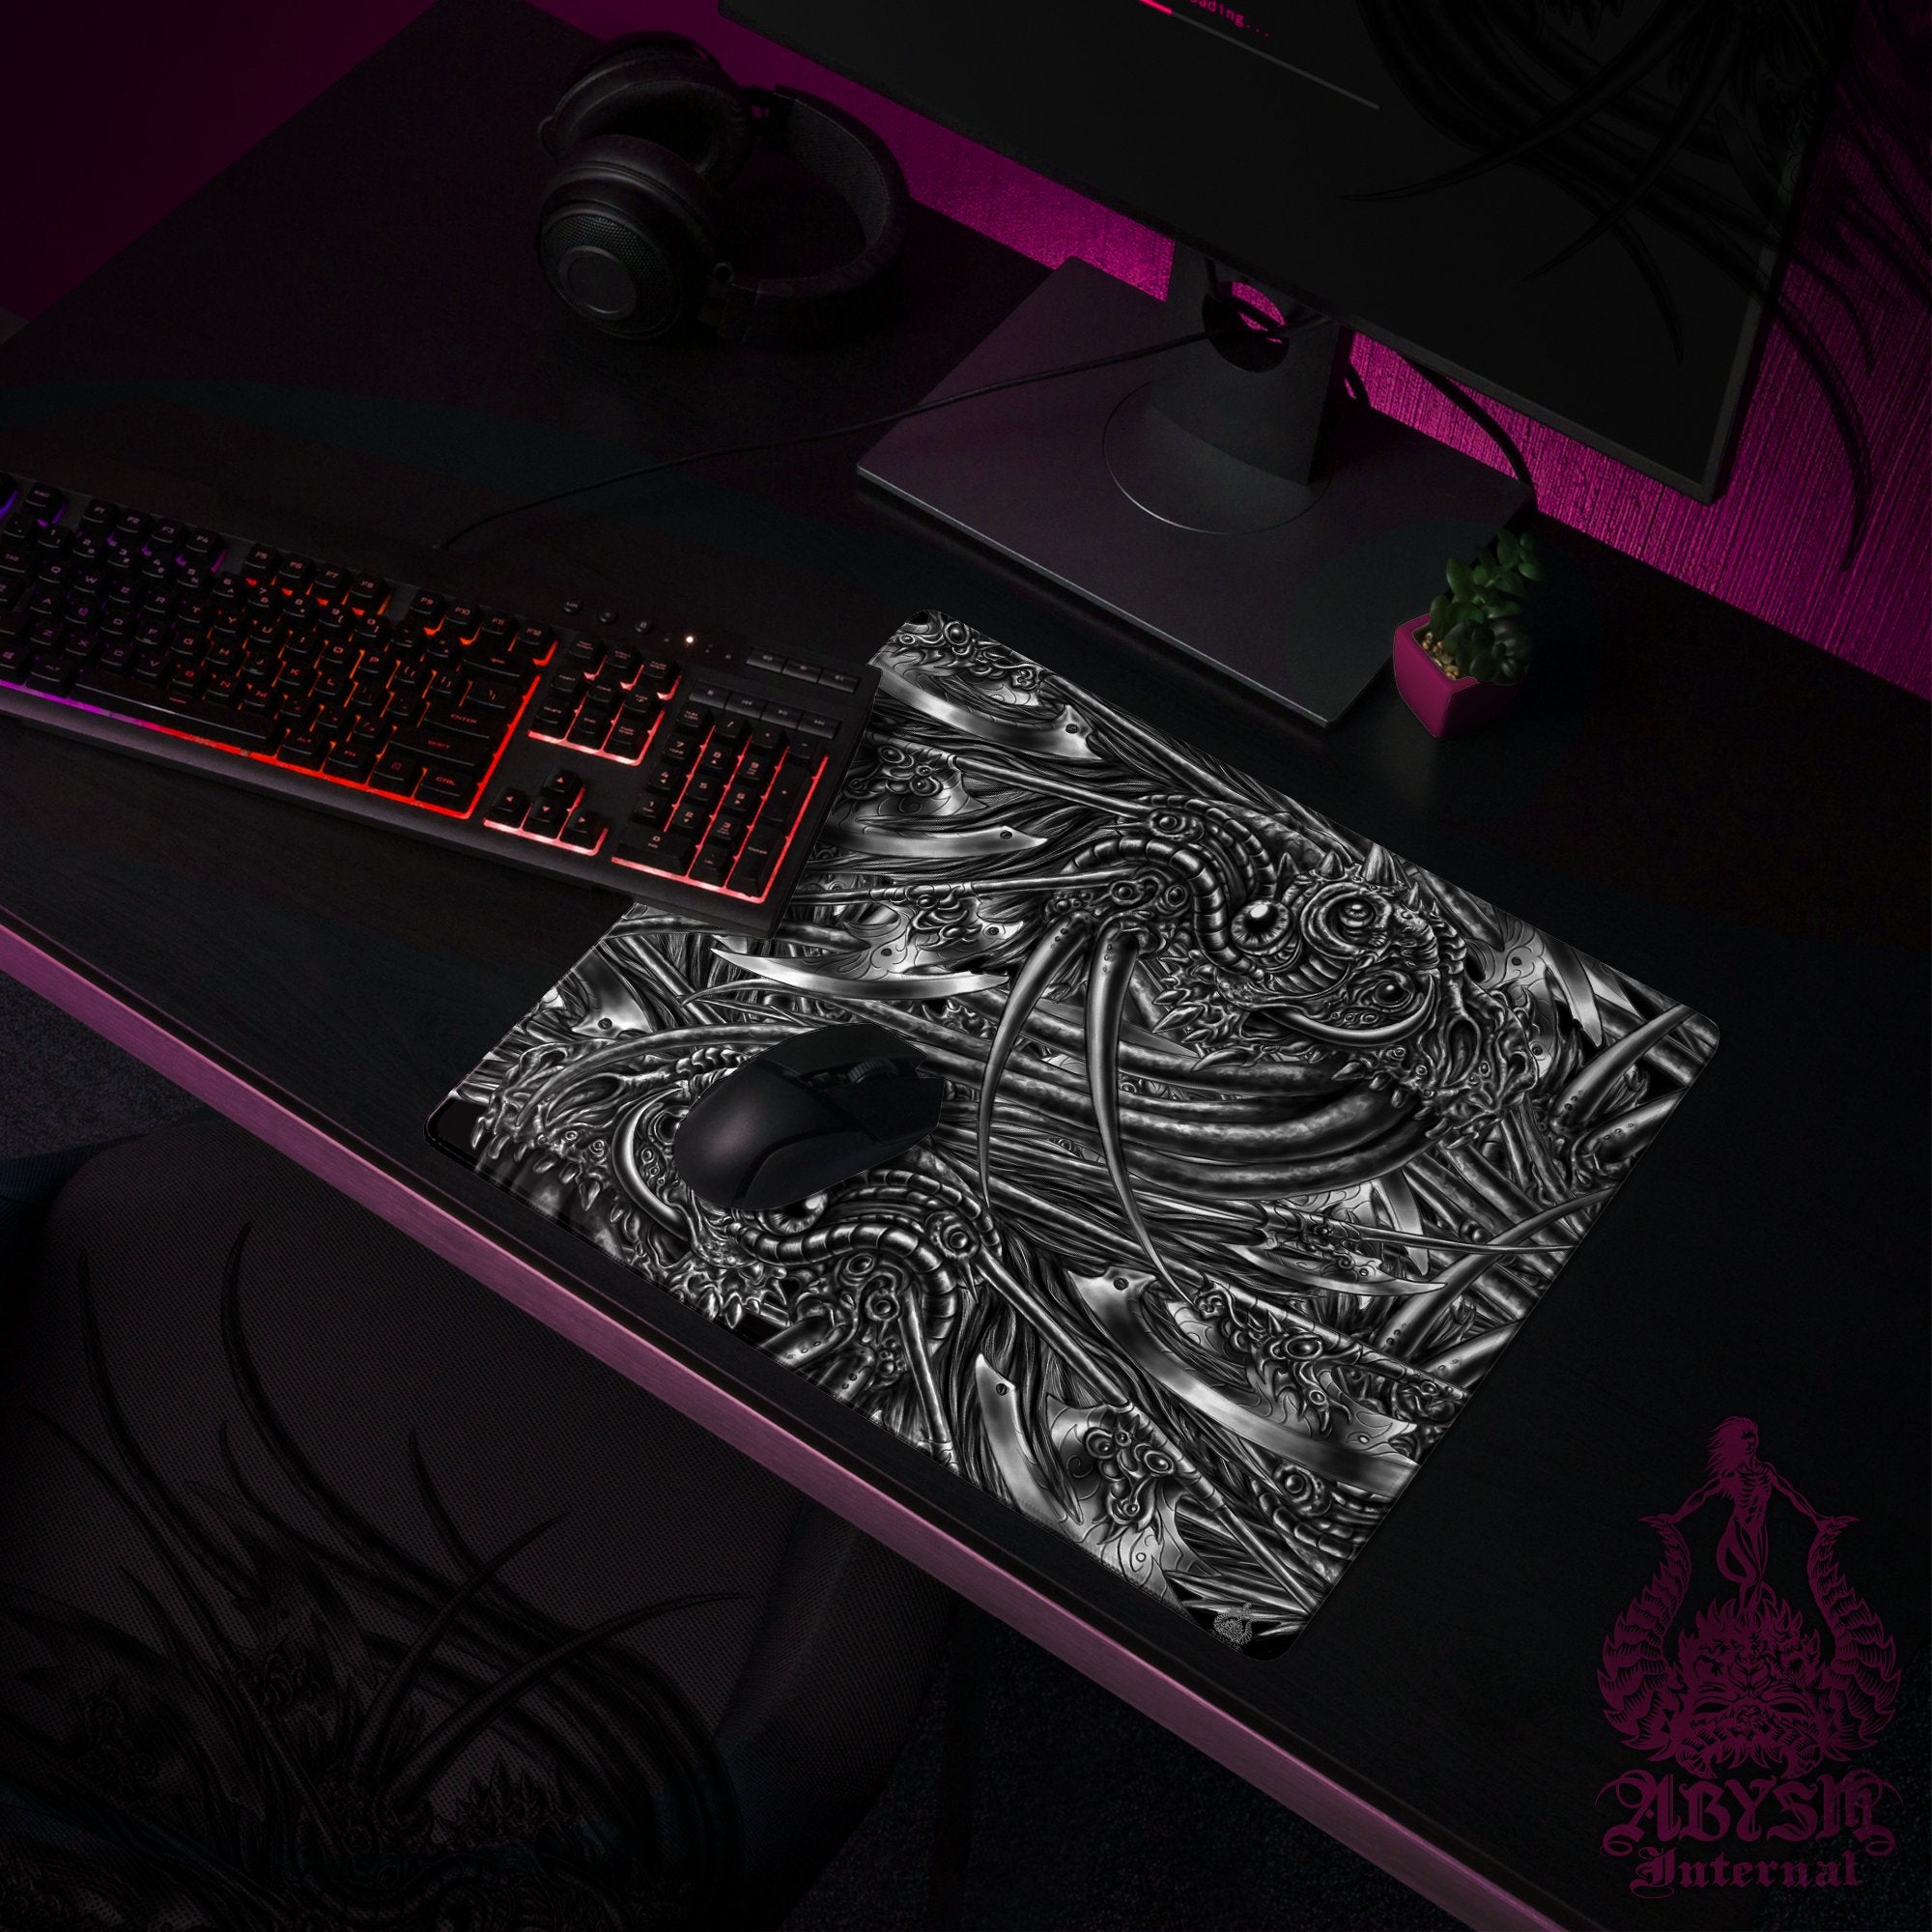 Gothic Art Gaming Desk Mat, Abstract Alien Mouse Pad, Goth Table Protector Cover, Workpad, Dark Fantasy Art Print - Abysm Internal